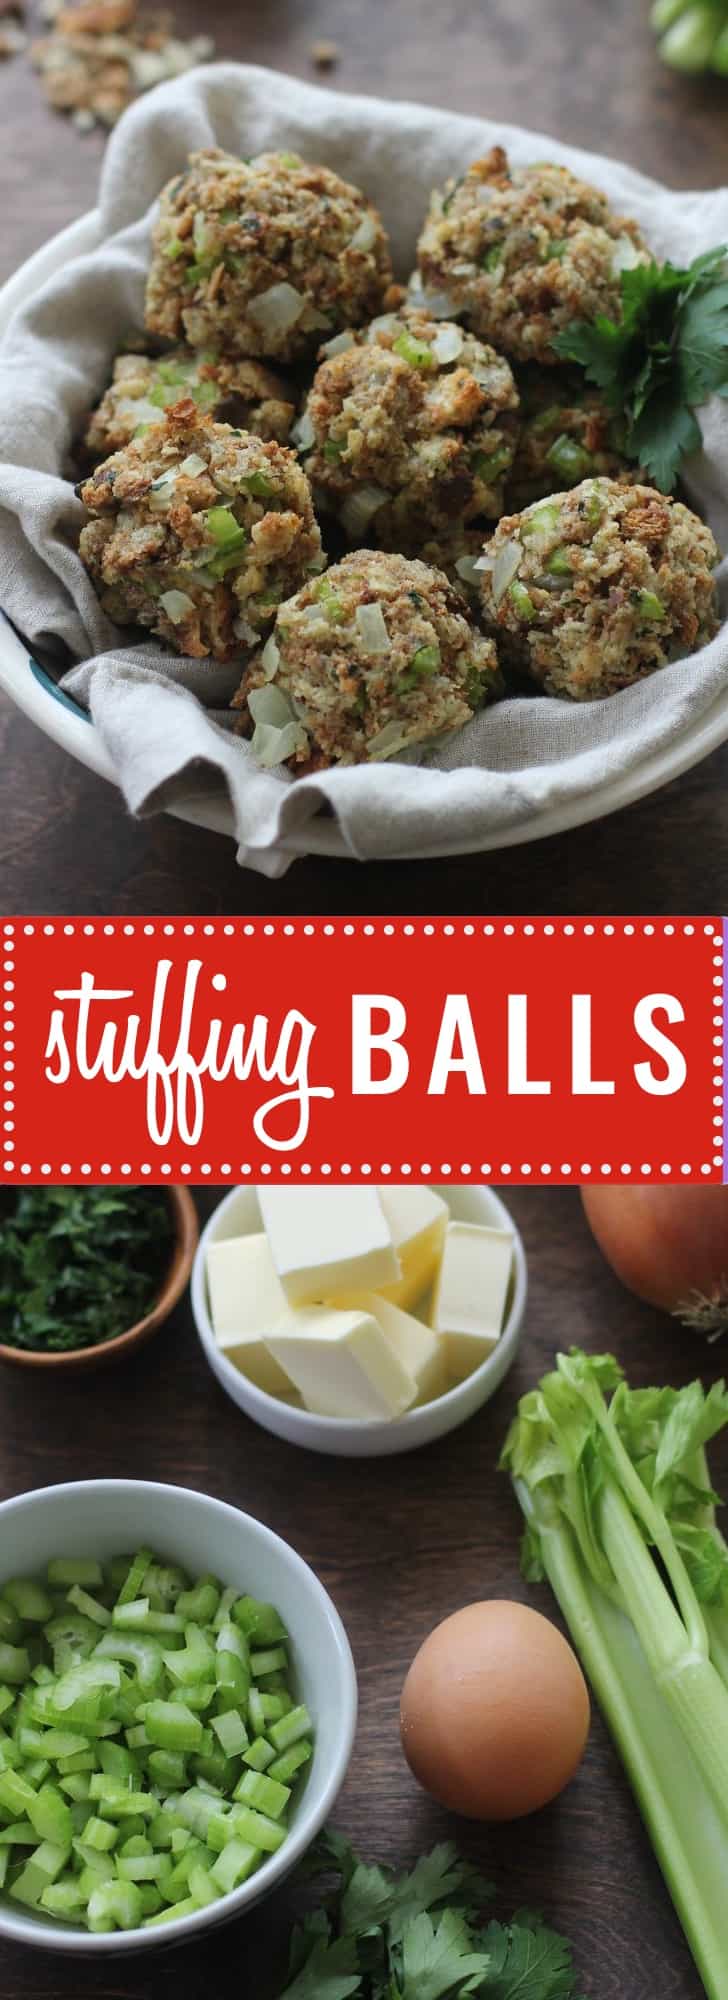 Stuffing Balls- A delicious holiday favorite reinvented. Rolled into balls and baked, a classic stuffing gets golden brown and crisp on the outside. Try it.